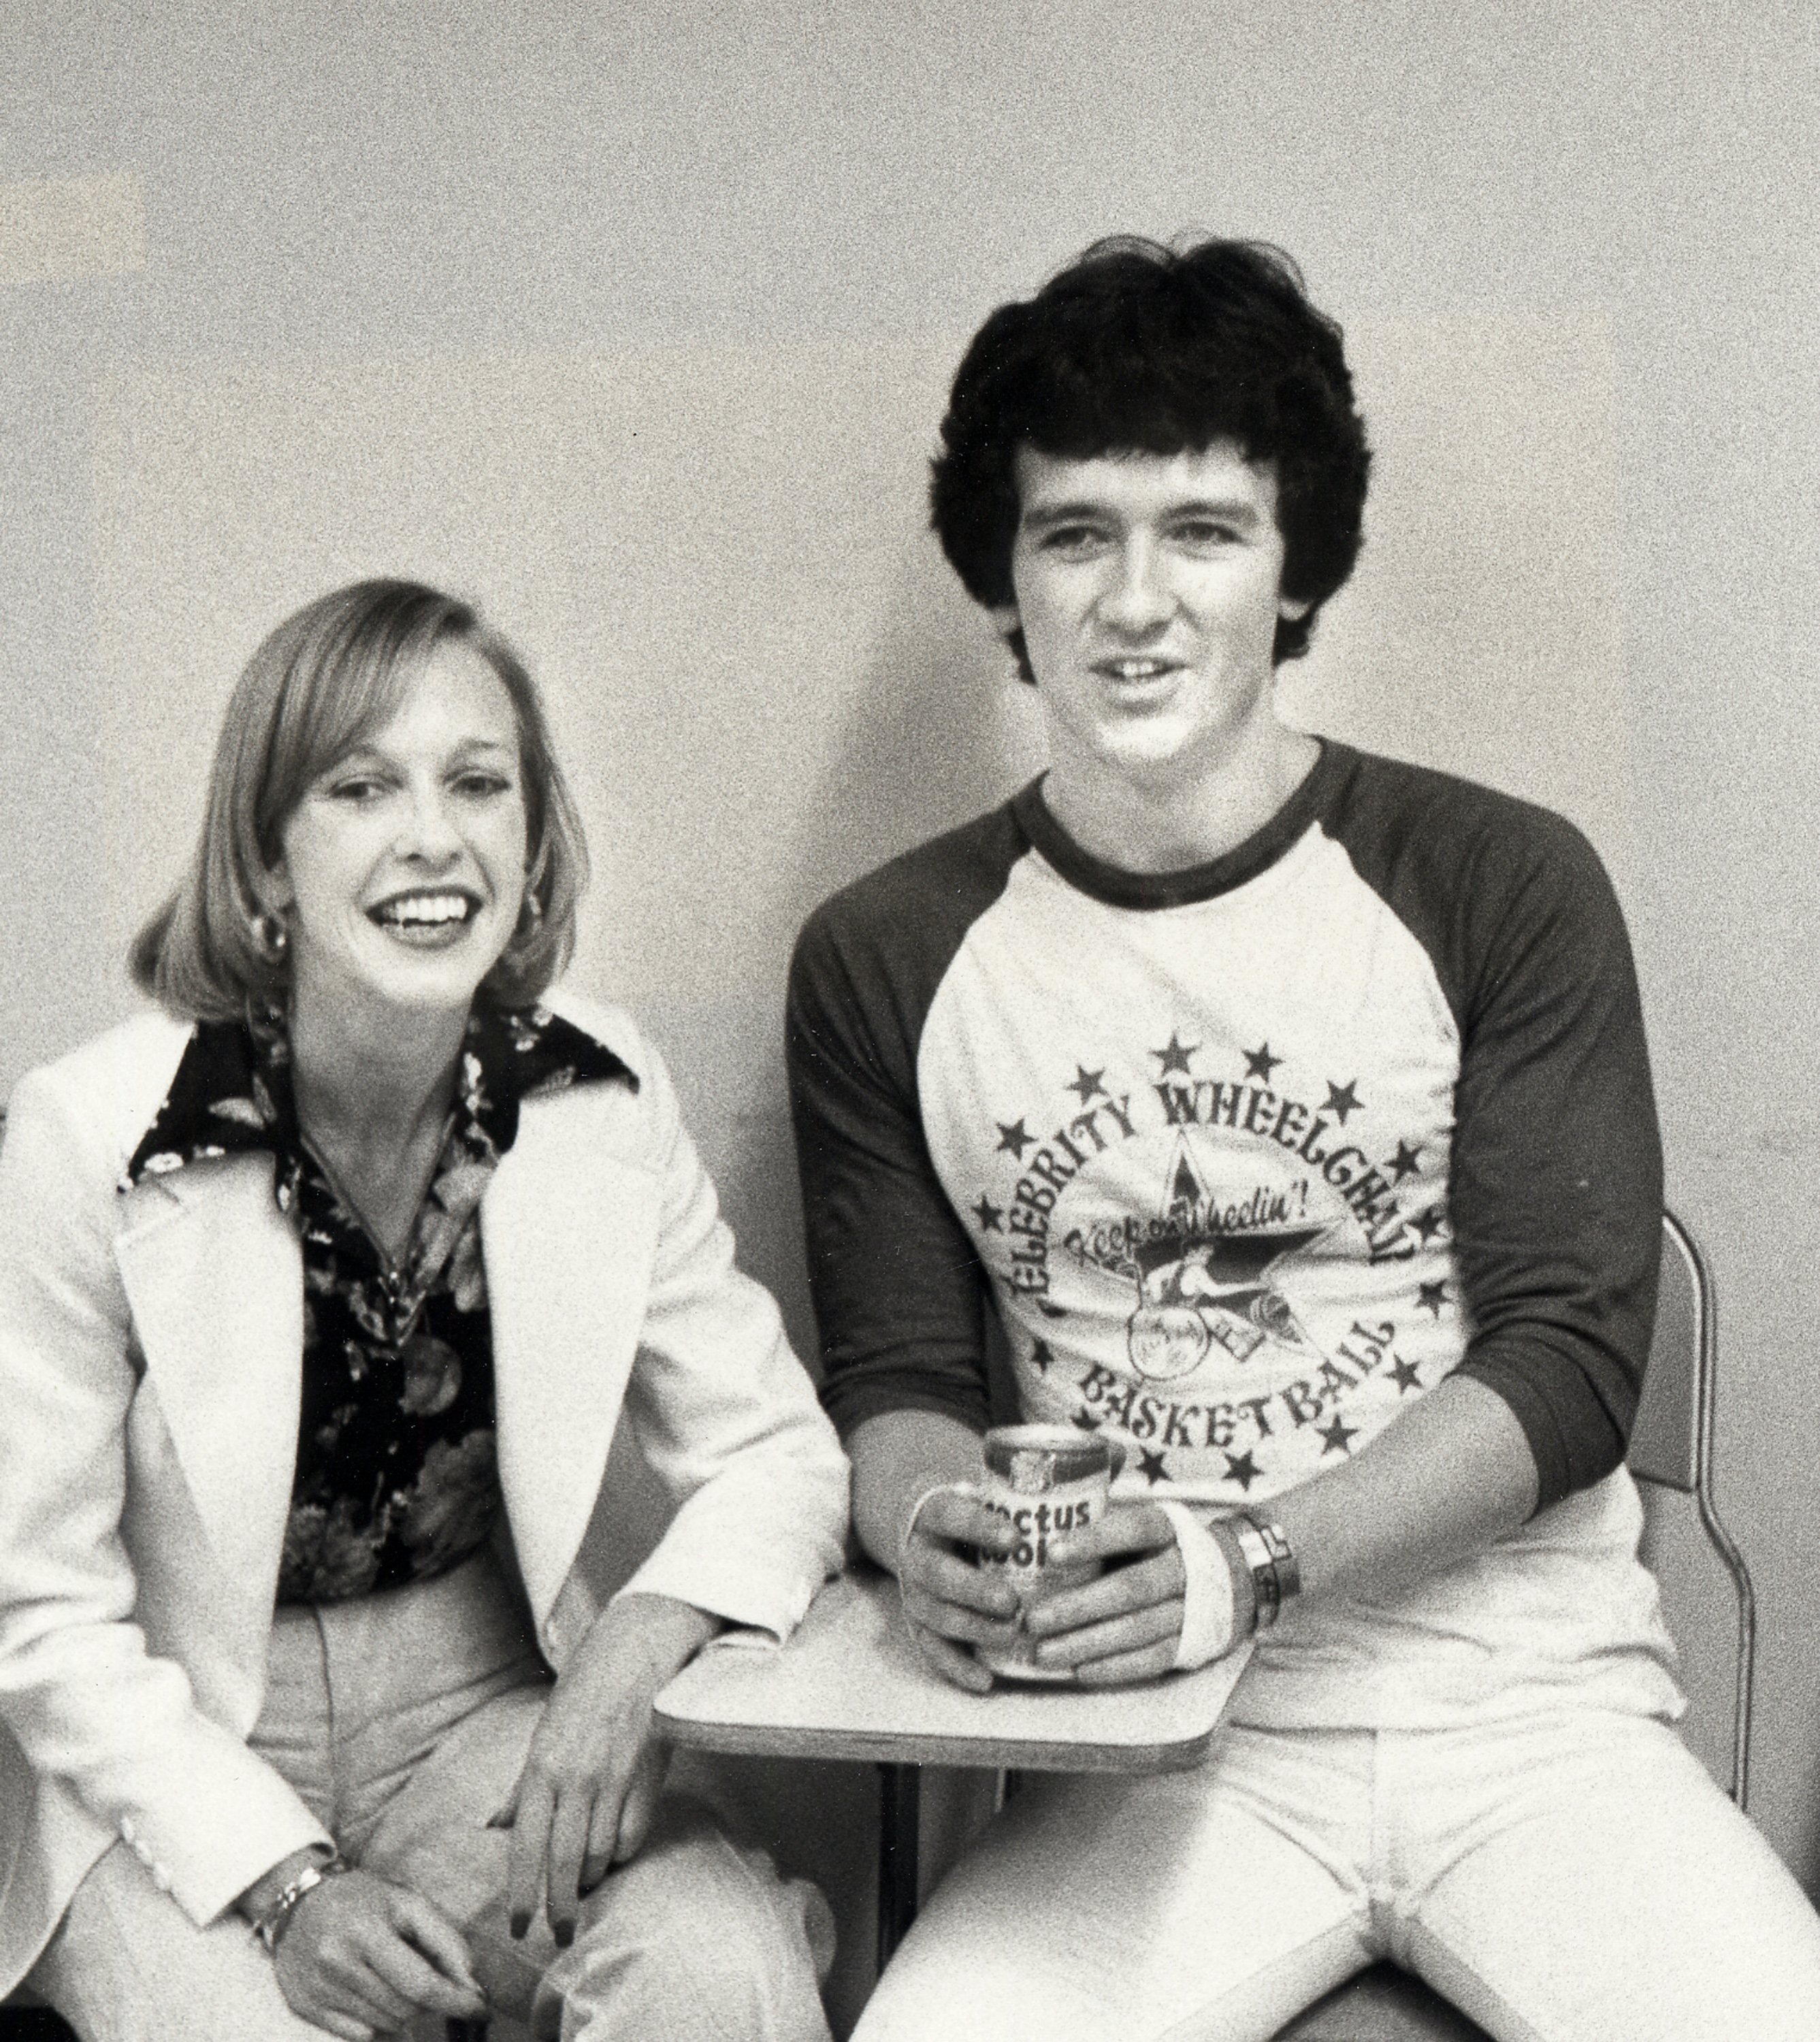 Patrick Duffy and wife Carlyn Rosser attend a basketball game at California State University on May 22, 1977 in Northridge | Photo: Getty Images